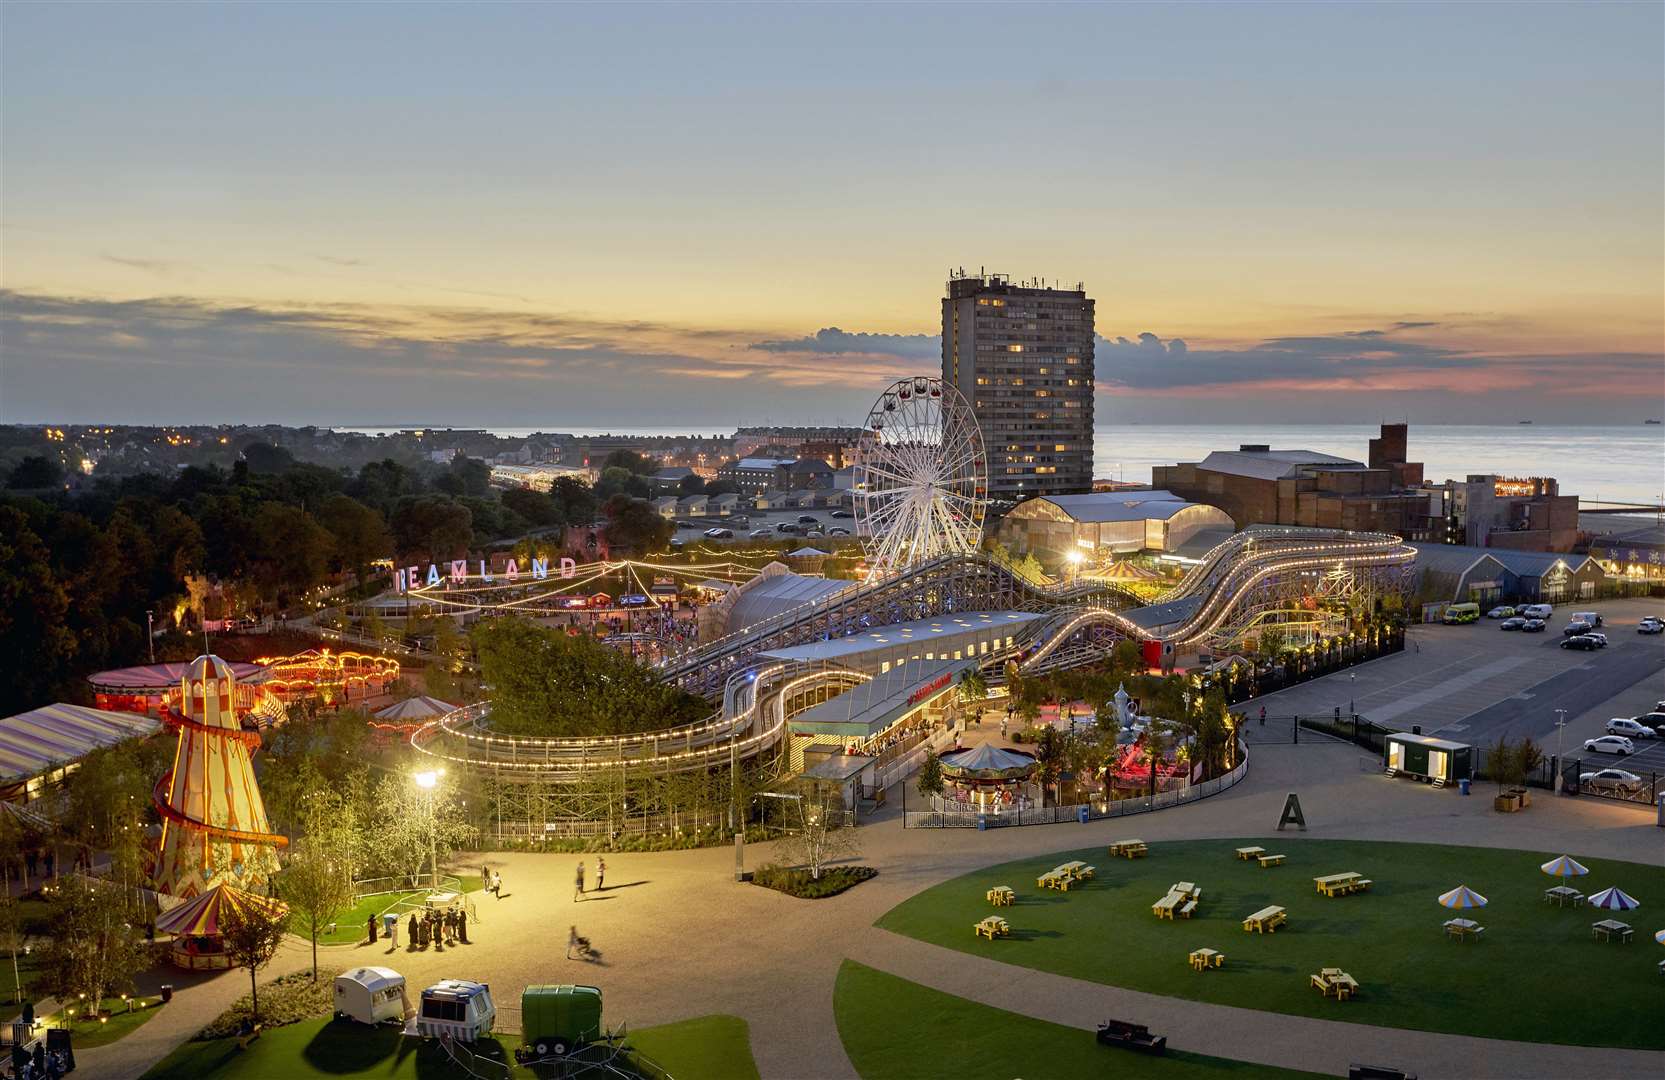 Dreamland in Margate recently announced it would not reopen until social distancing guidelines were relaxed